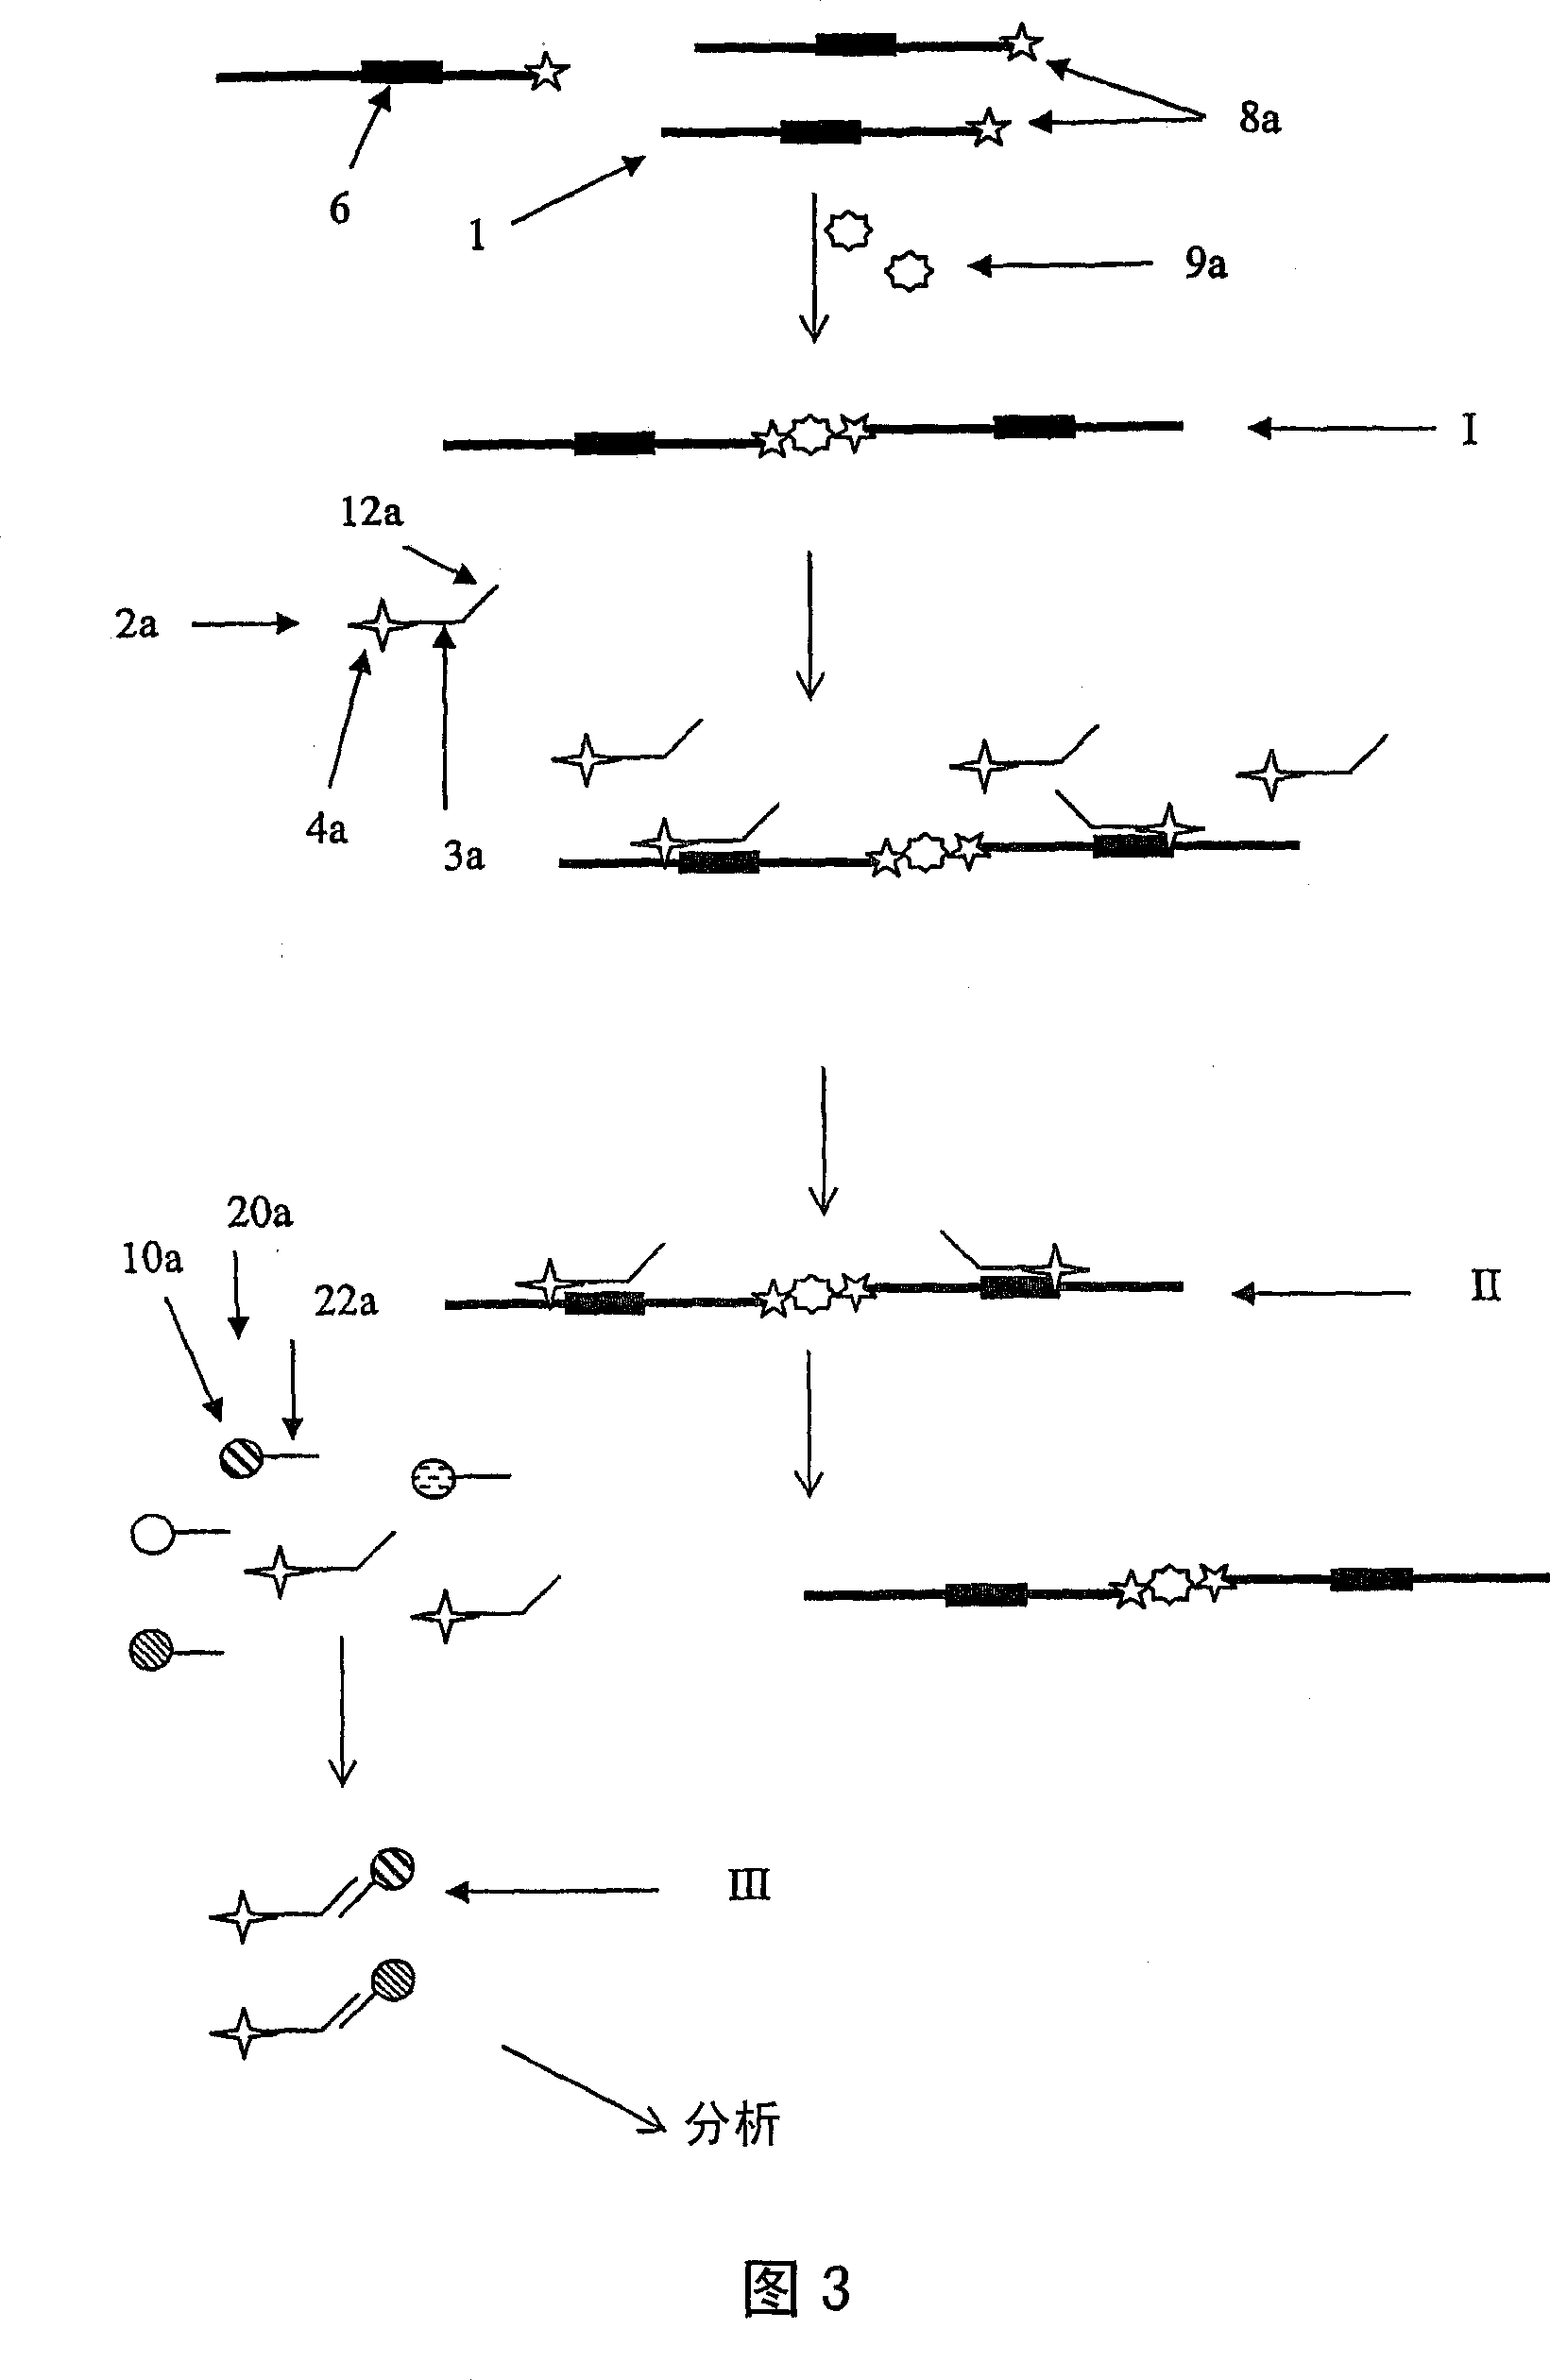 Method and kit for primer based amplification of nucleic acids